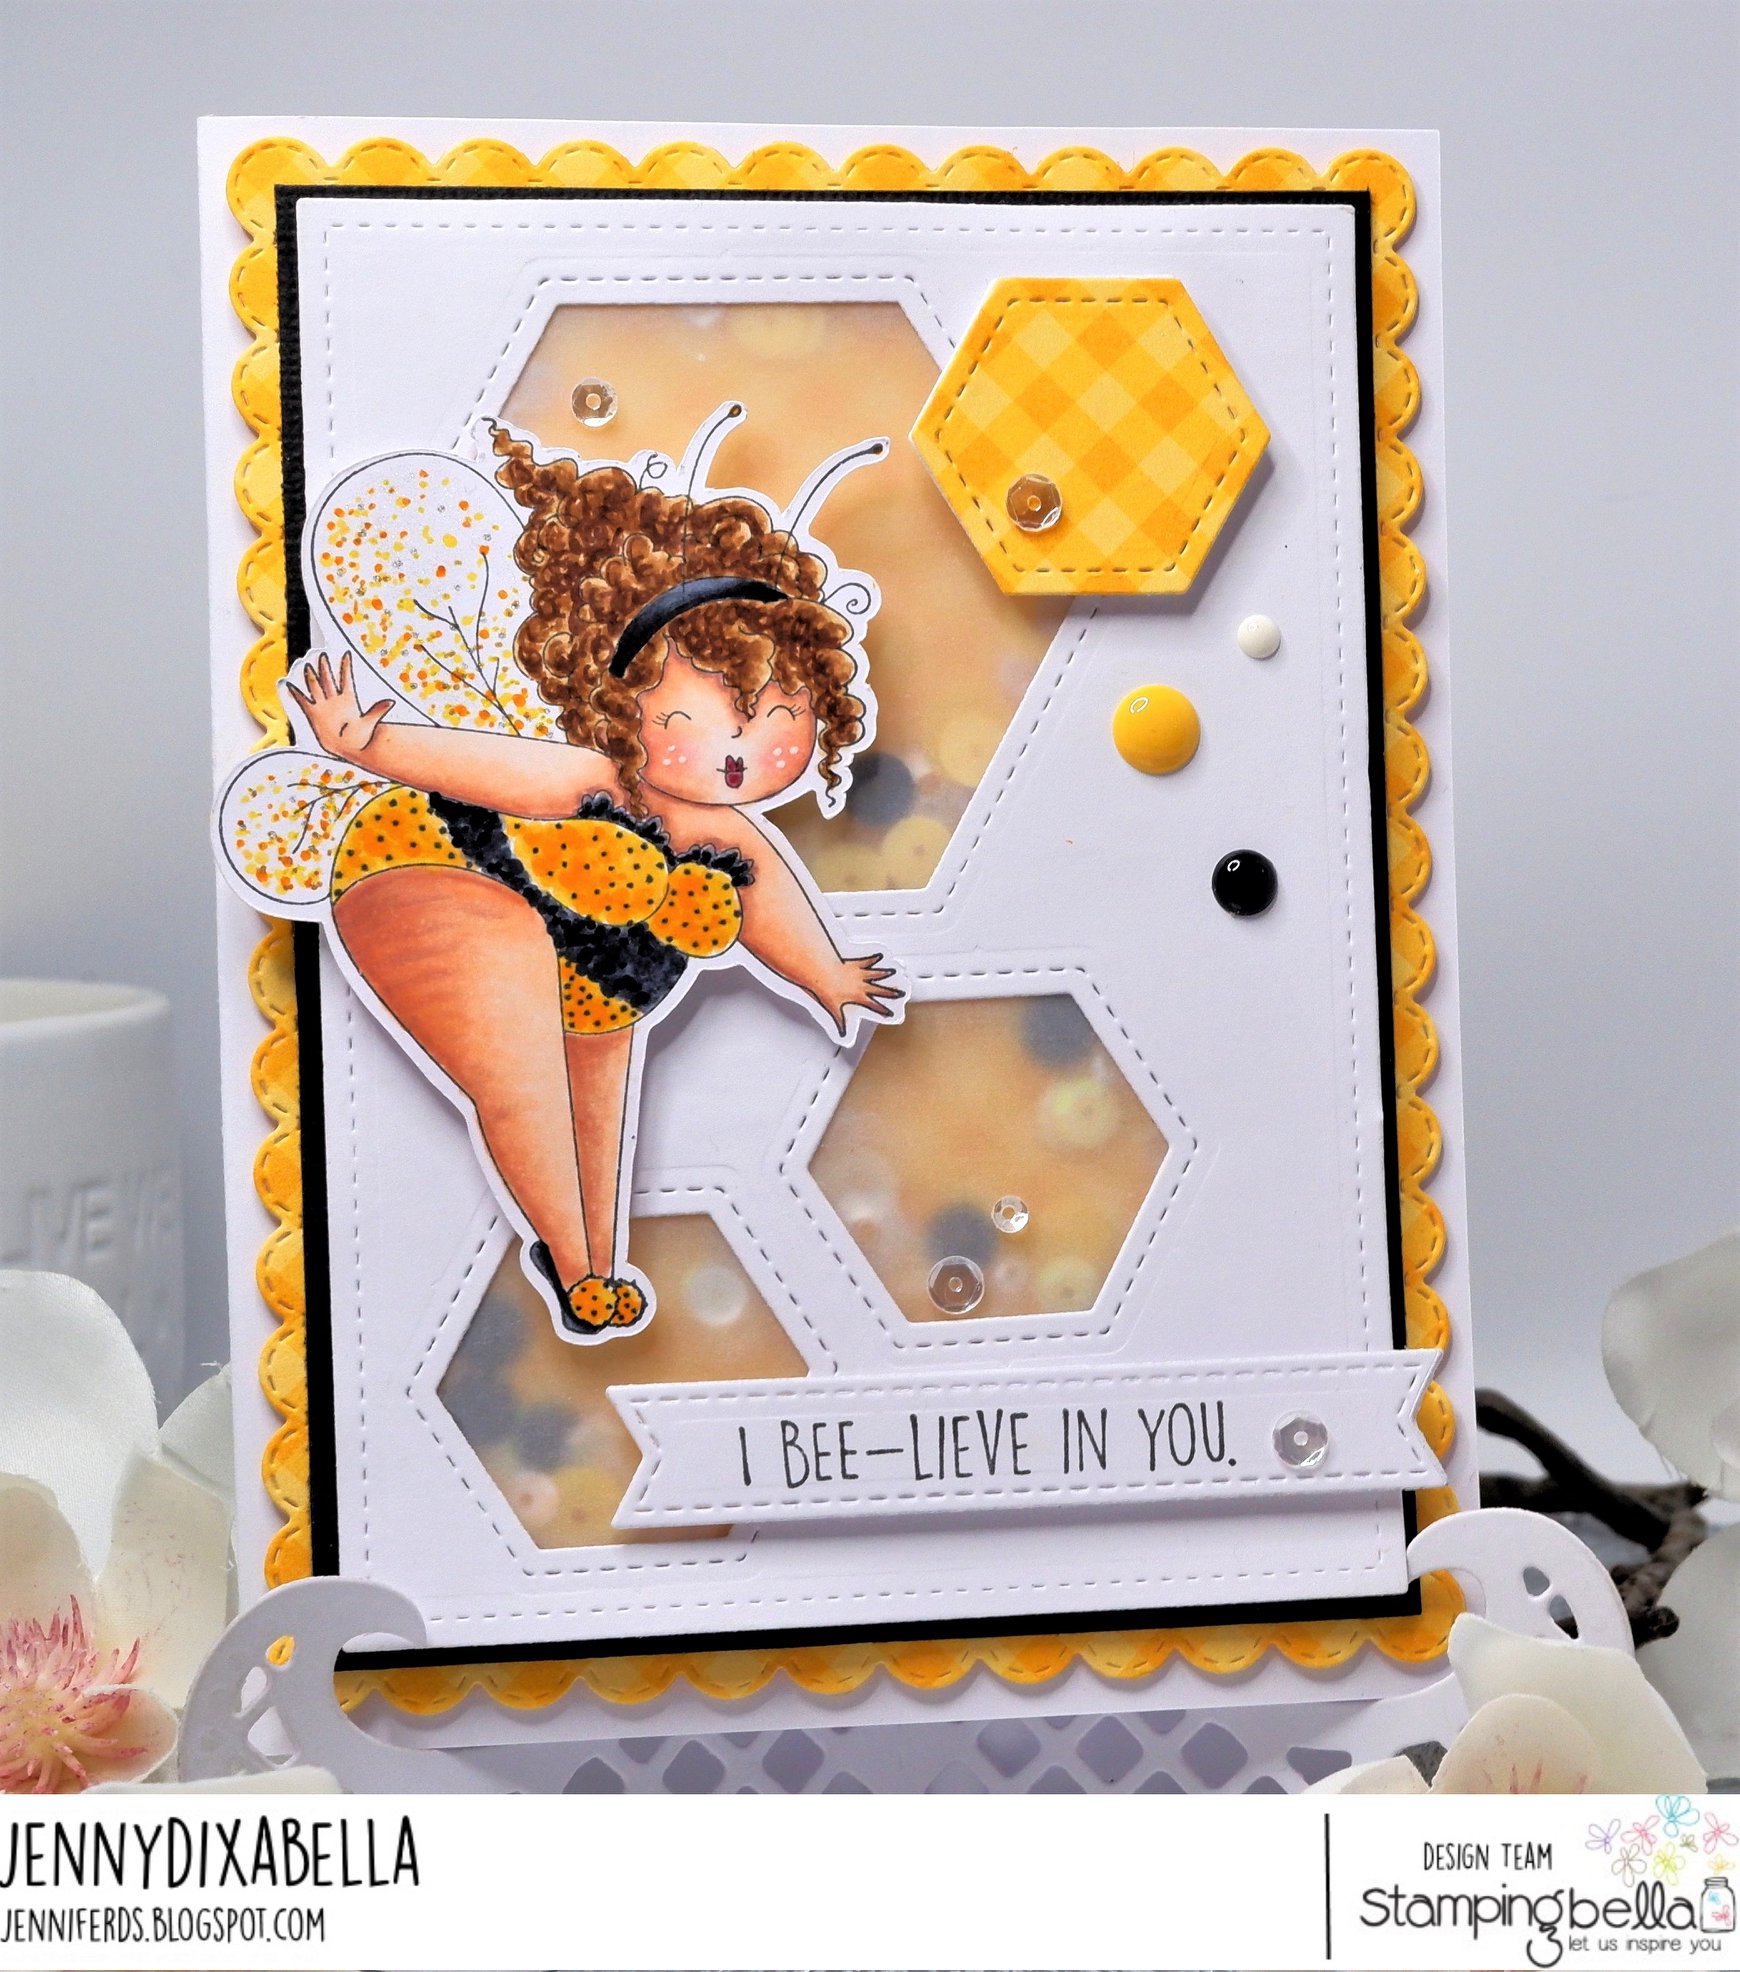 www.stampingbella.com: rubber stamp used: EDNA THE BUMBLEBEE card by Jenny Dix